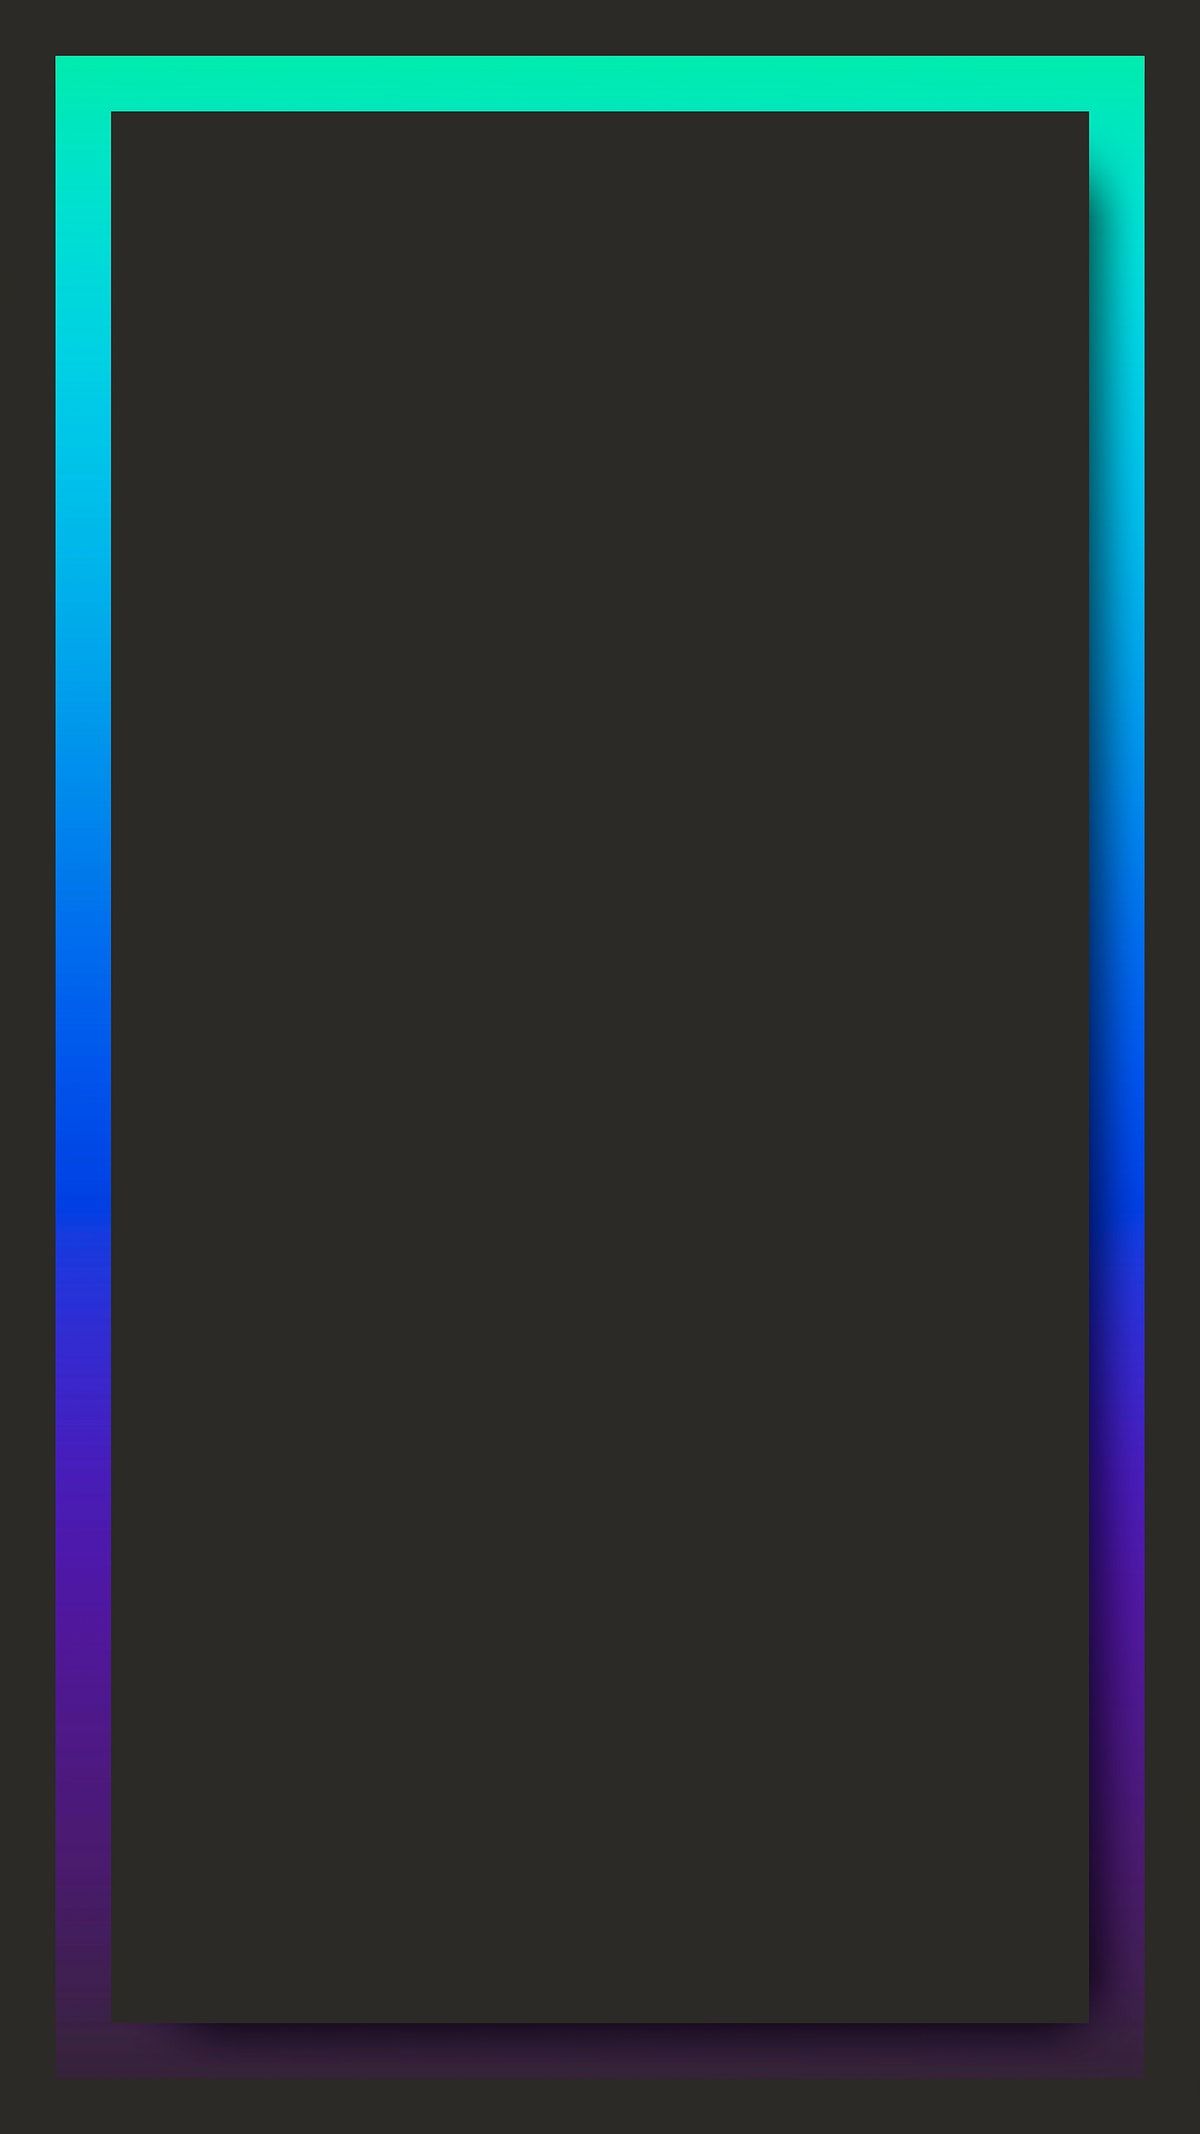 Neon frame phone background. Royalty free vector